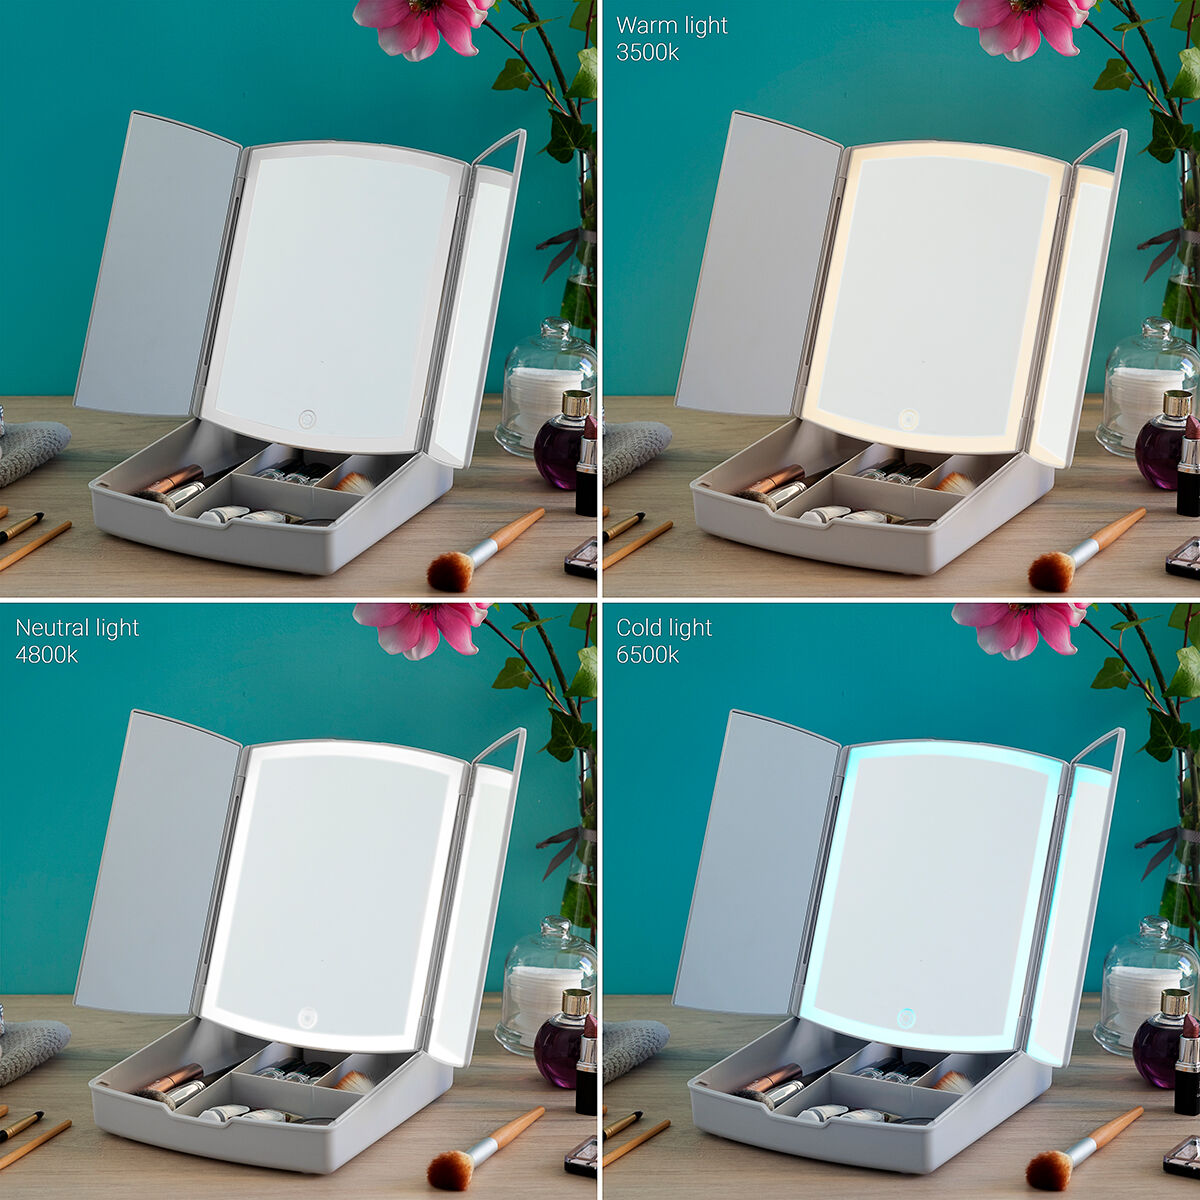 3-In-1 Folding LED Mirror with Make-up Organiser Panomir InnovaGoods-10